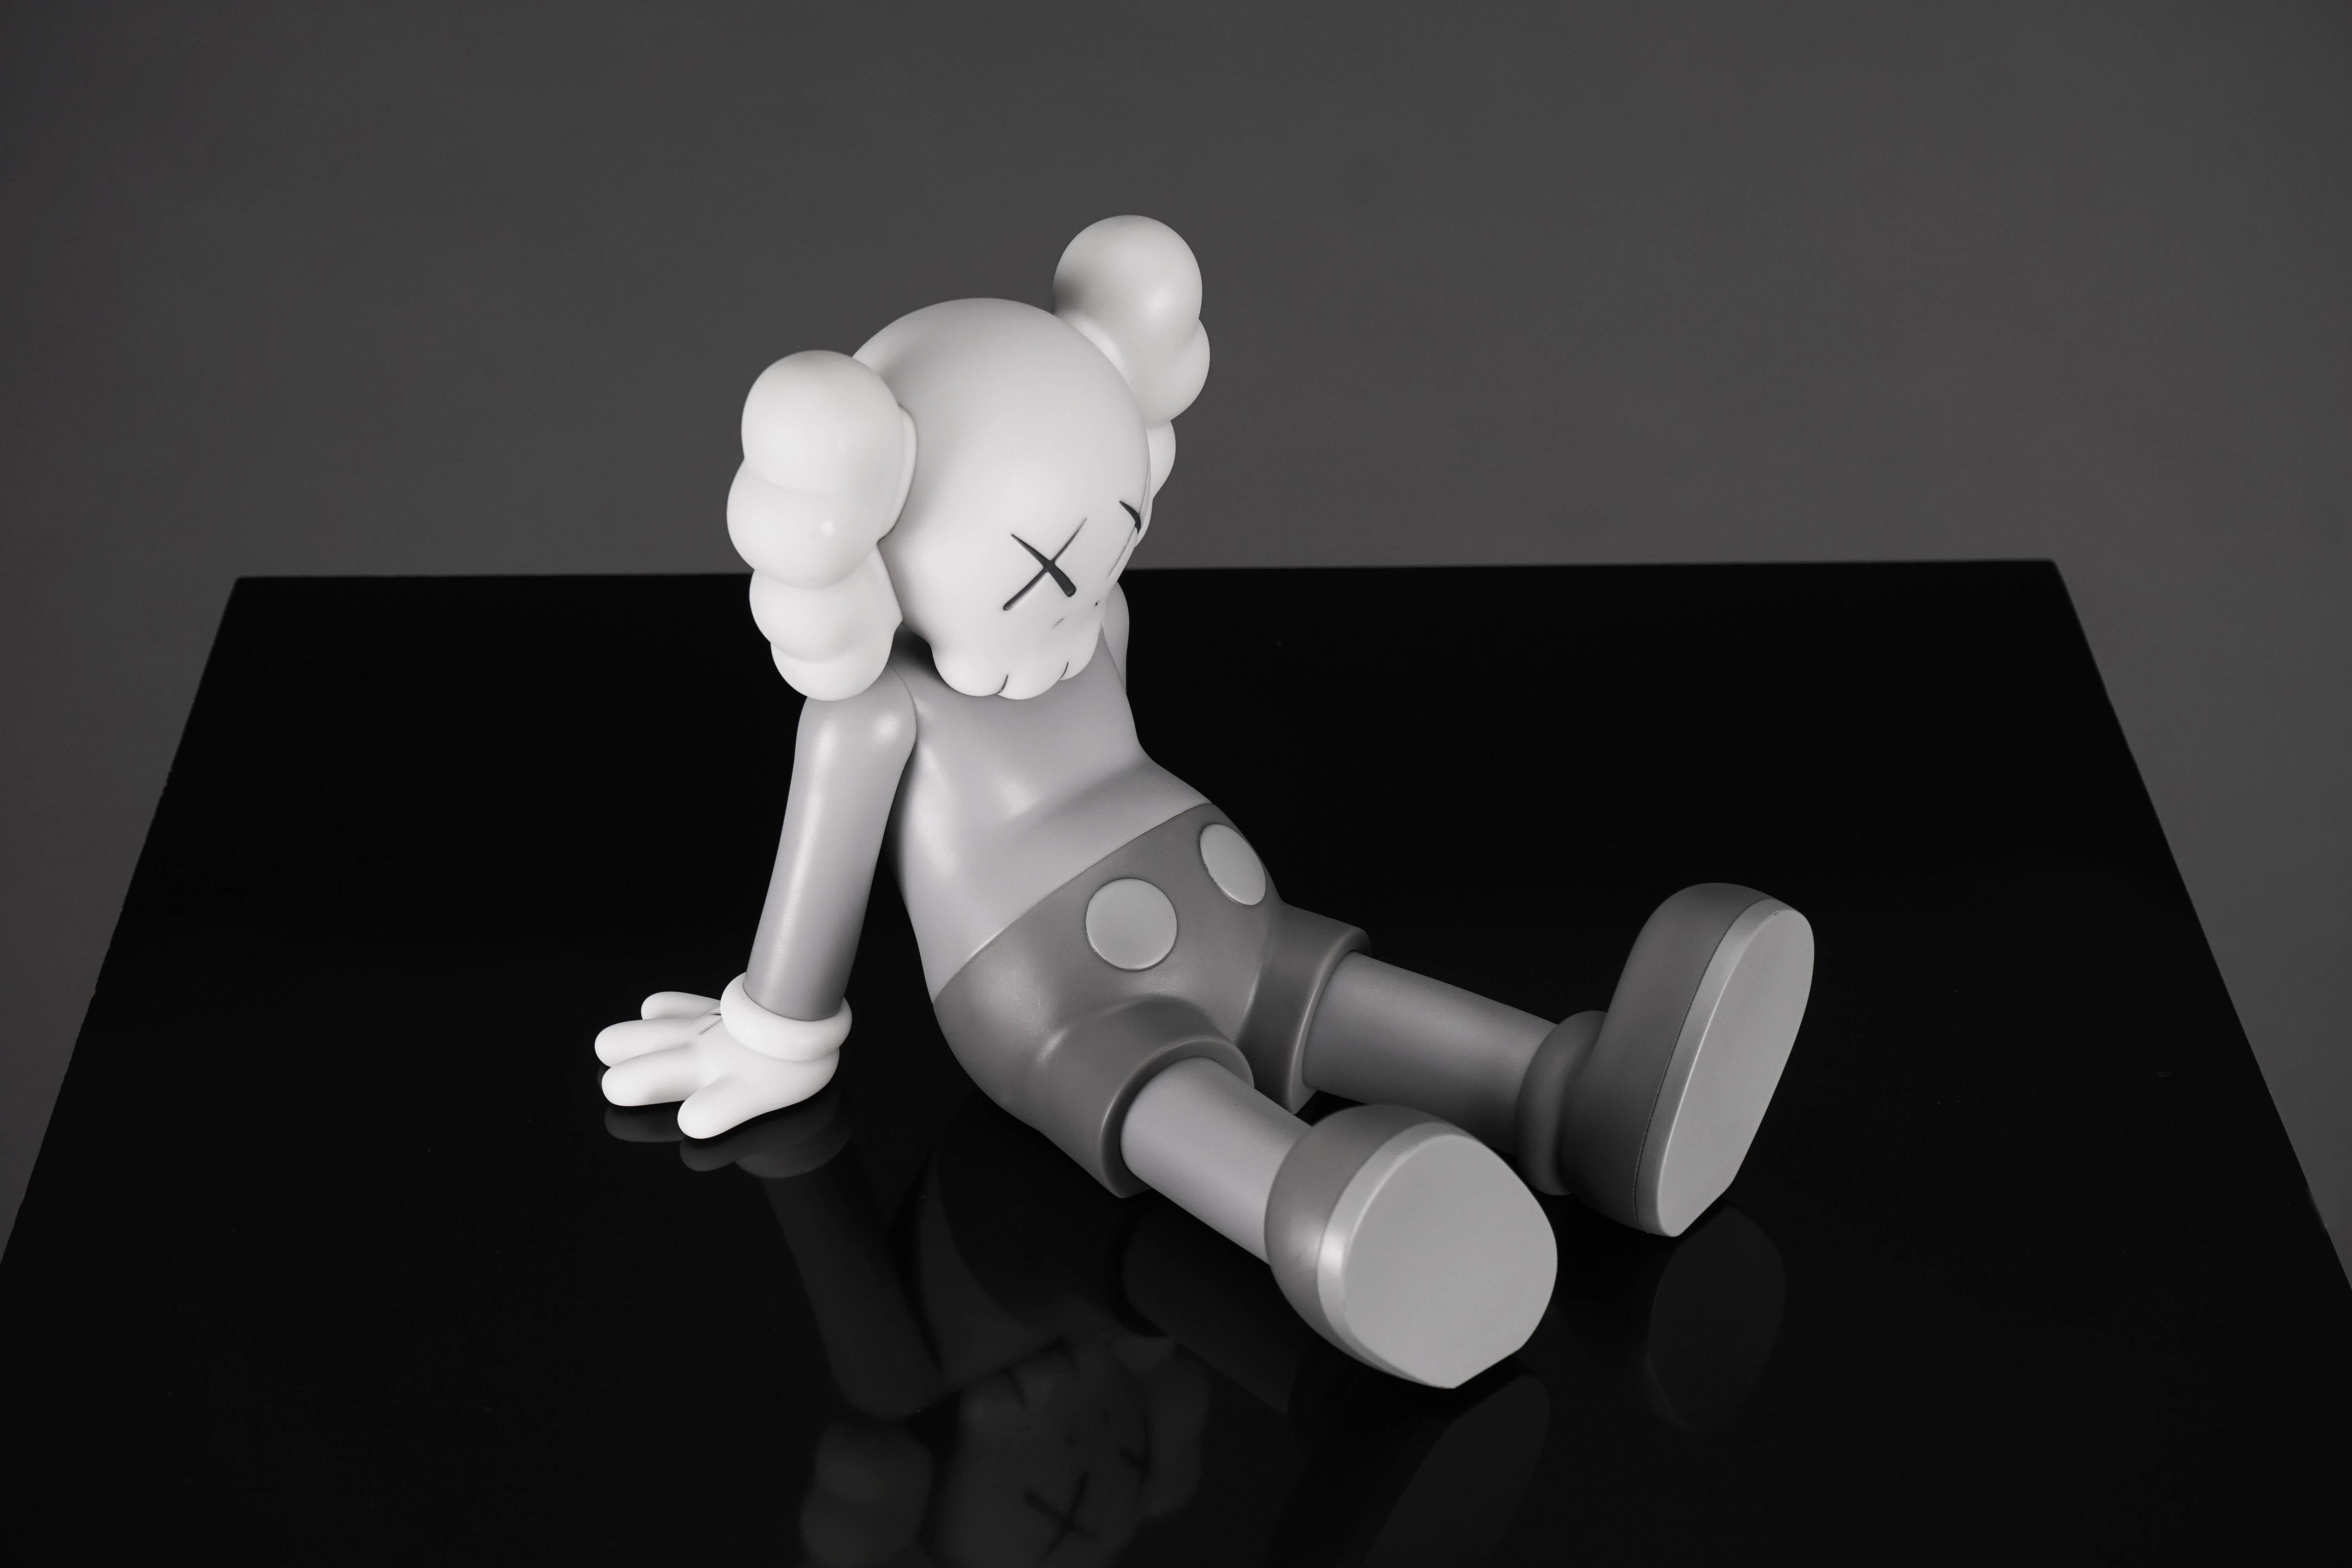 To commemorate the unveiling of his new sculpture in Taipei, KAWS released this Holiday figure on January 29th, 2019. Reminiscent of his previous work titled 